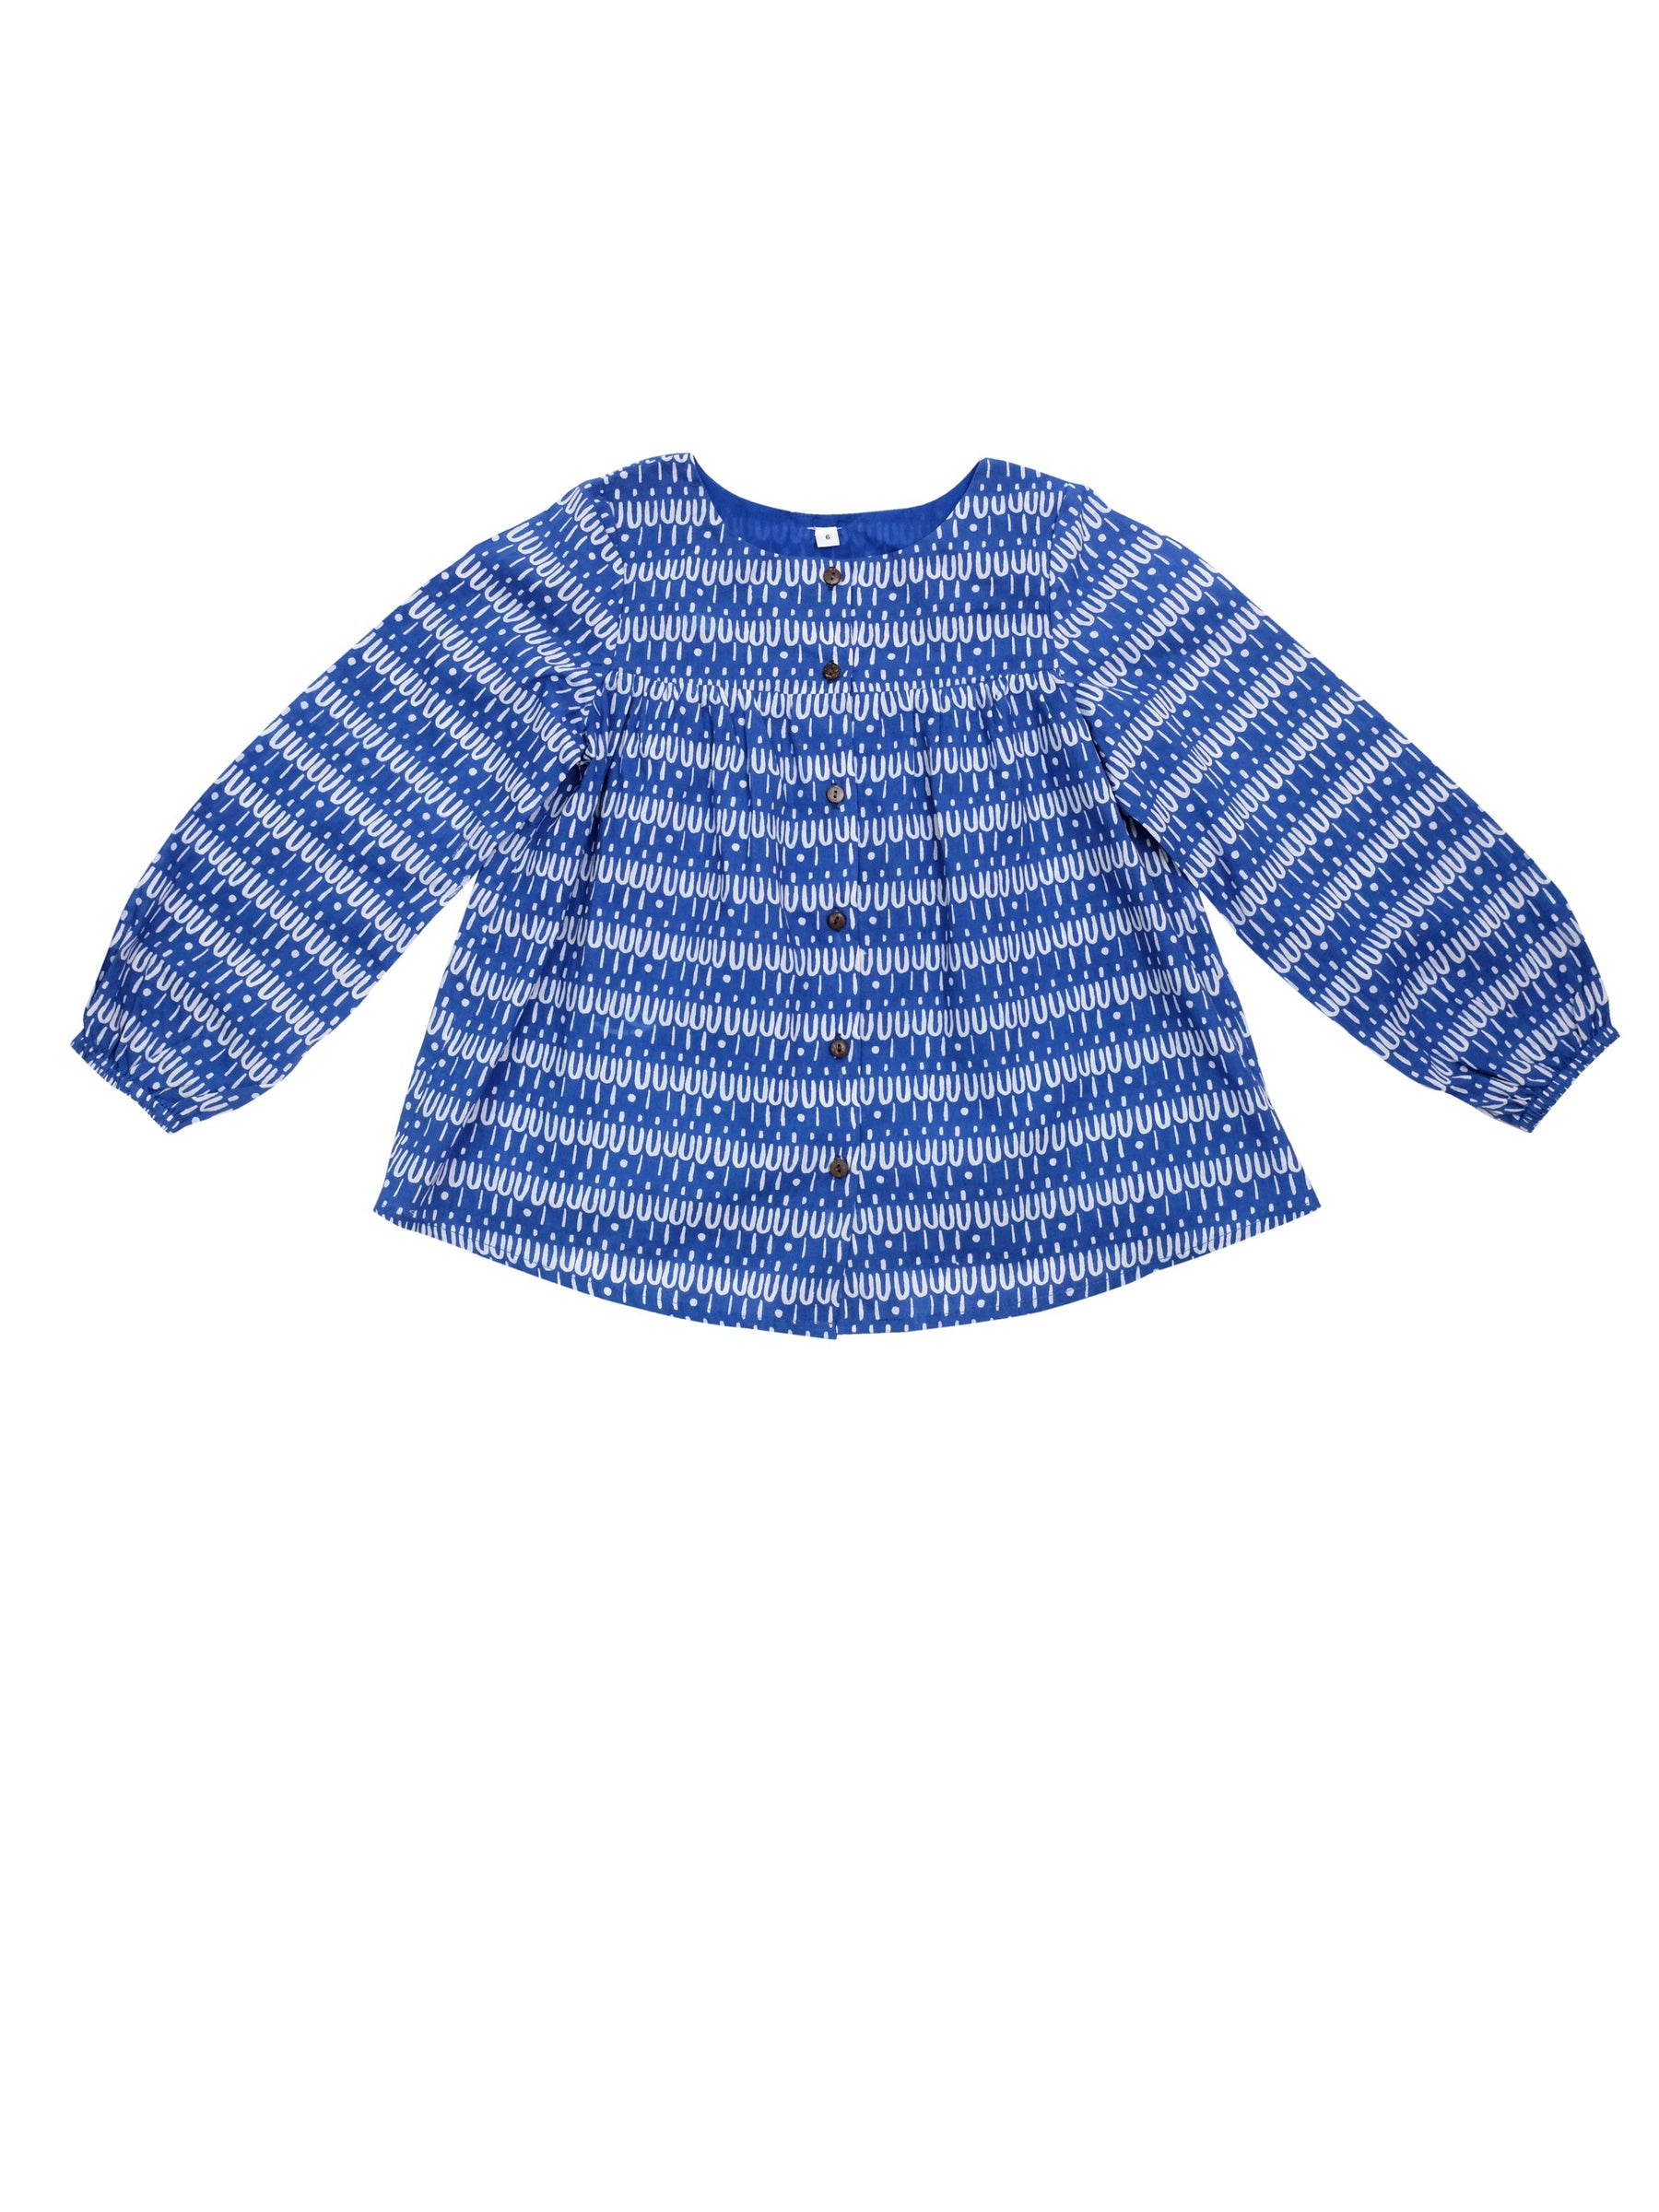 Kids organic cotton smock in Scallop on blue 0-6 yrs-Humphries and Begg